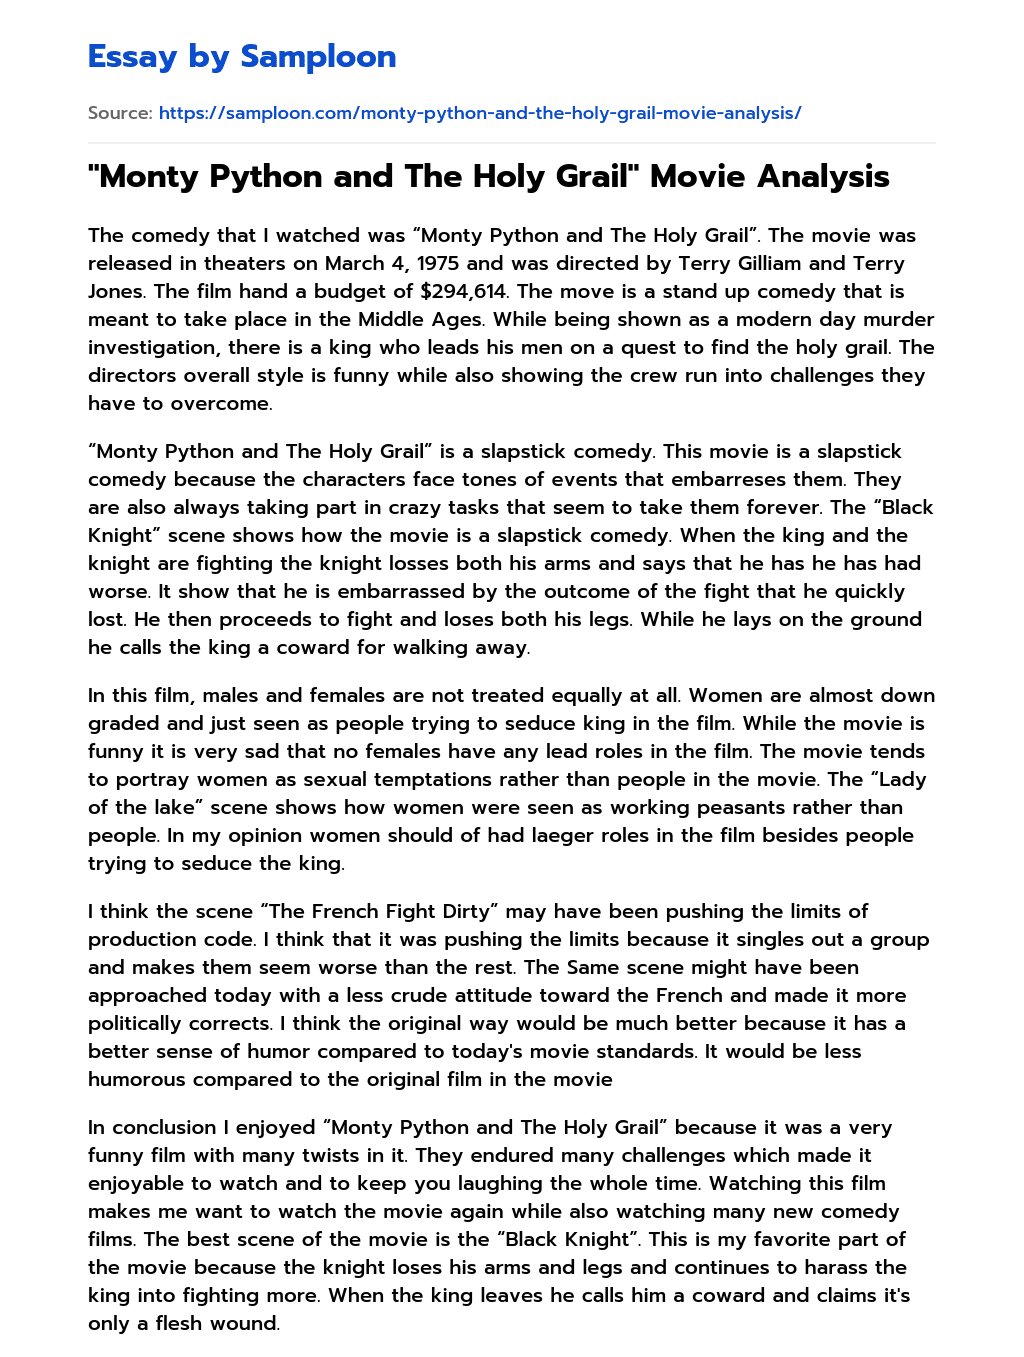 “Monty Python and The Holy Grail” Movie Analysis essay